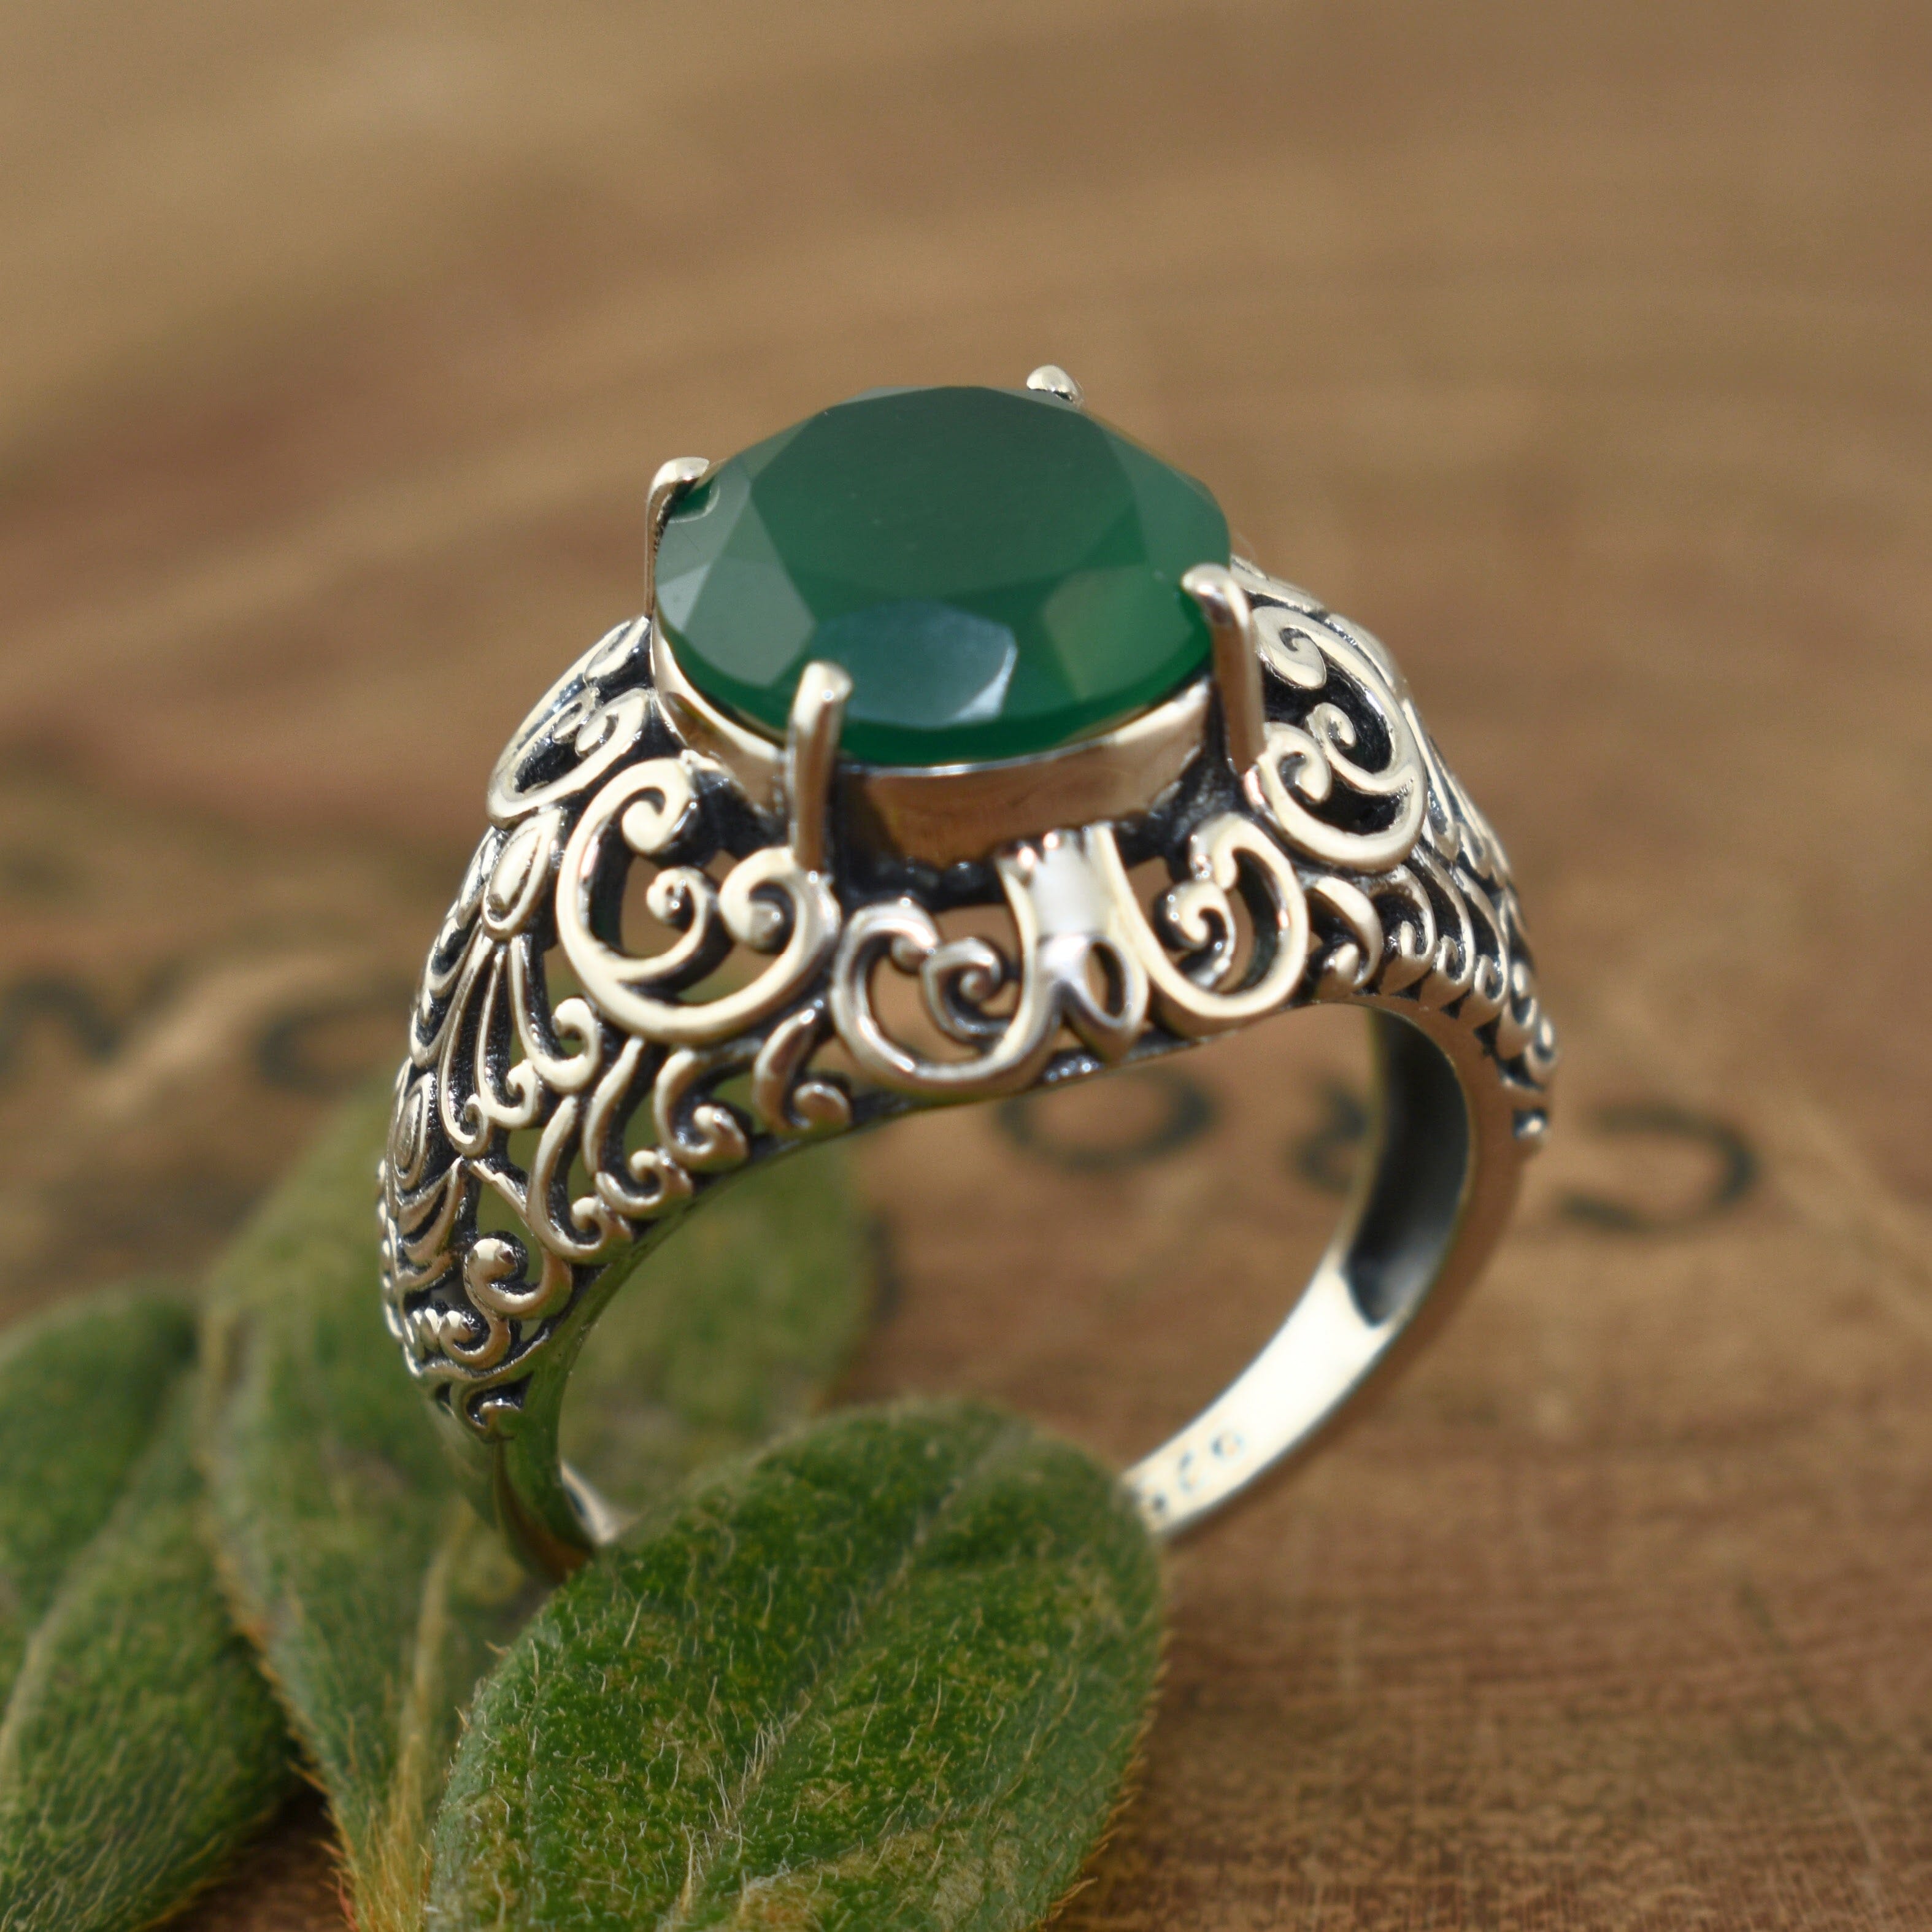 Handcrafted sterling silver ring with round green onyx stone